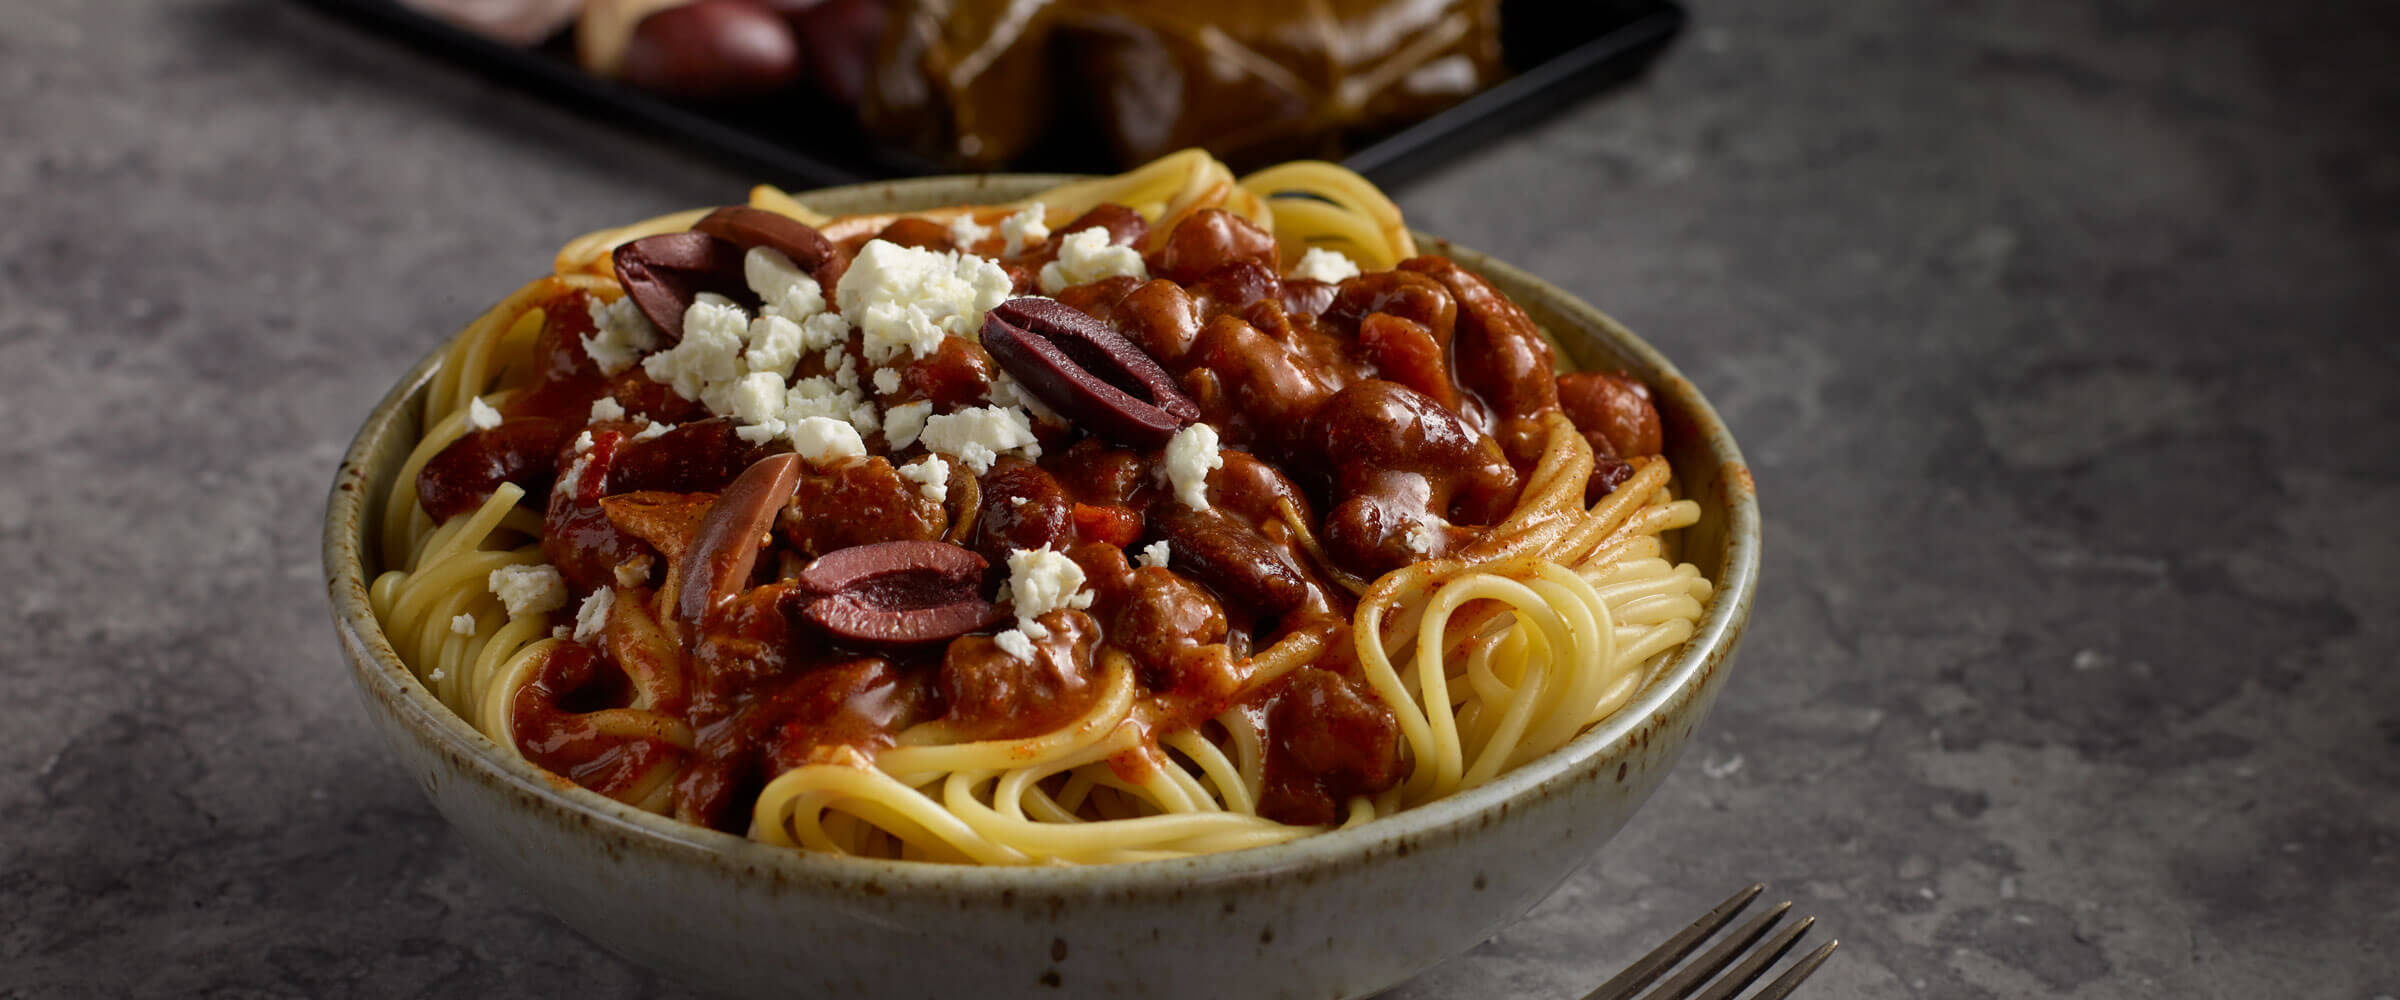 Big Greek chili spaghetti topped with olives in bowl on gray table